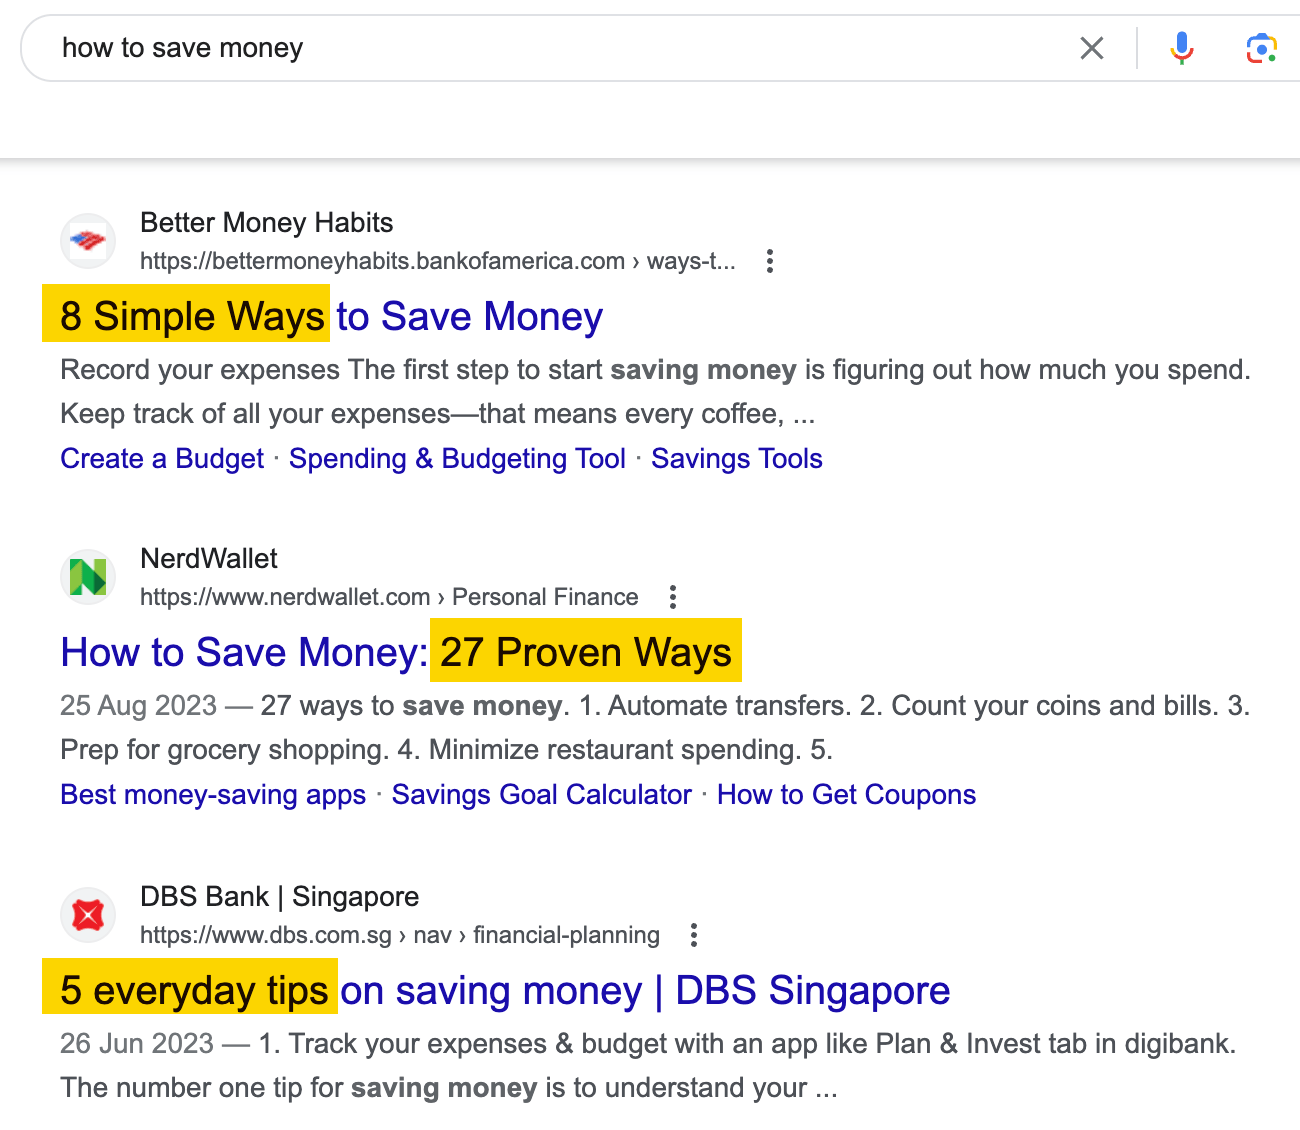 Search results for "how to save money"